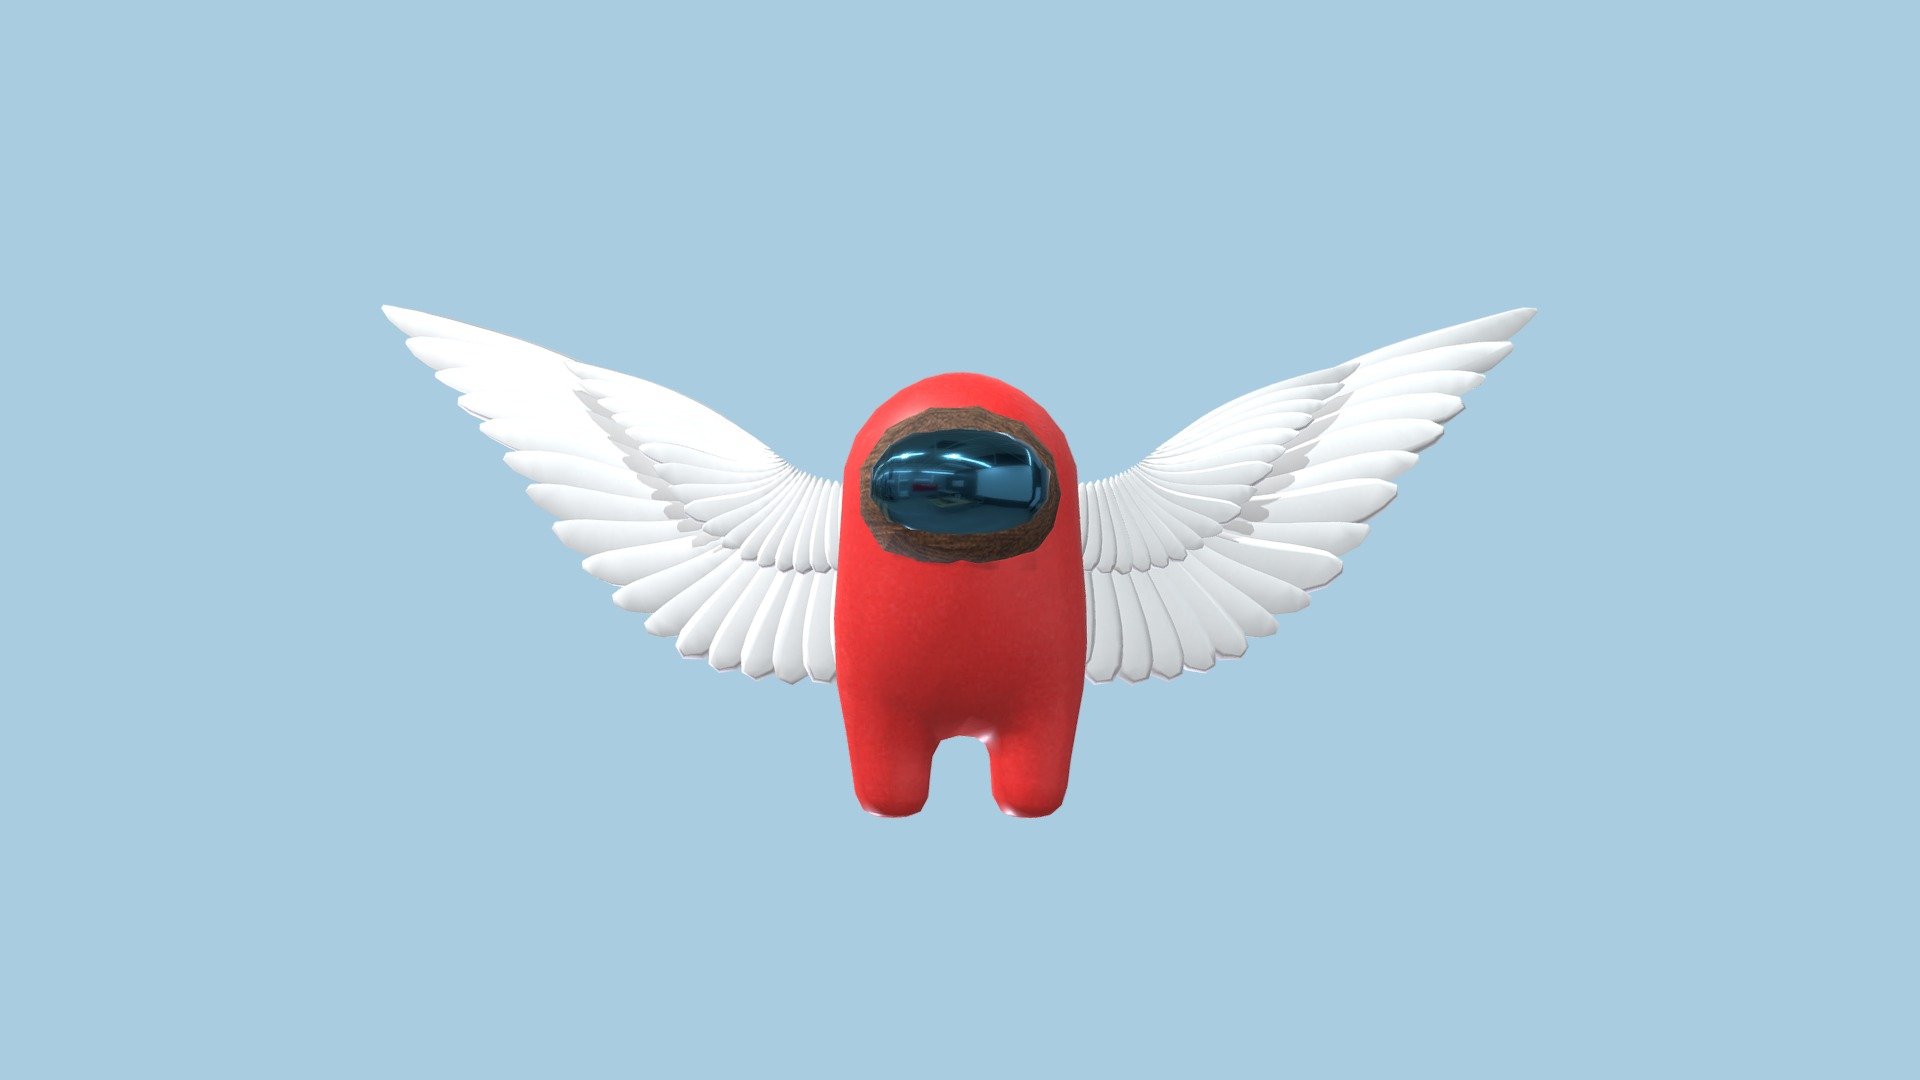 This is a 3d model Amongus I did for a university task. The aim was to create a 3d model Amongus. I thought it would be cool to create wings for the character and also give the visor a wooden texture, the point of making a wooden visor is that it’s not a common material for an angel, and that’s why I thought it would be interesting 3d model